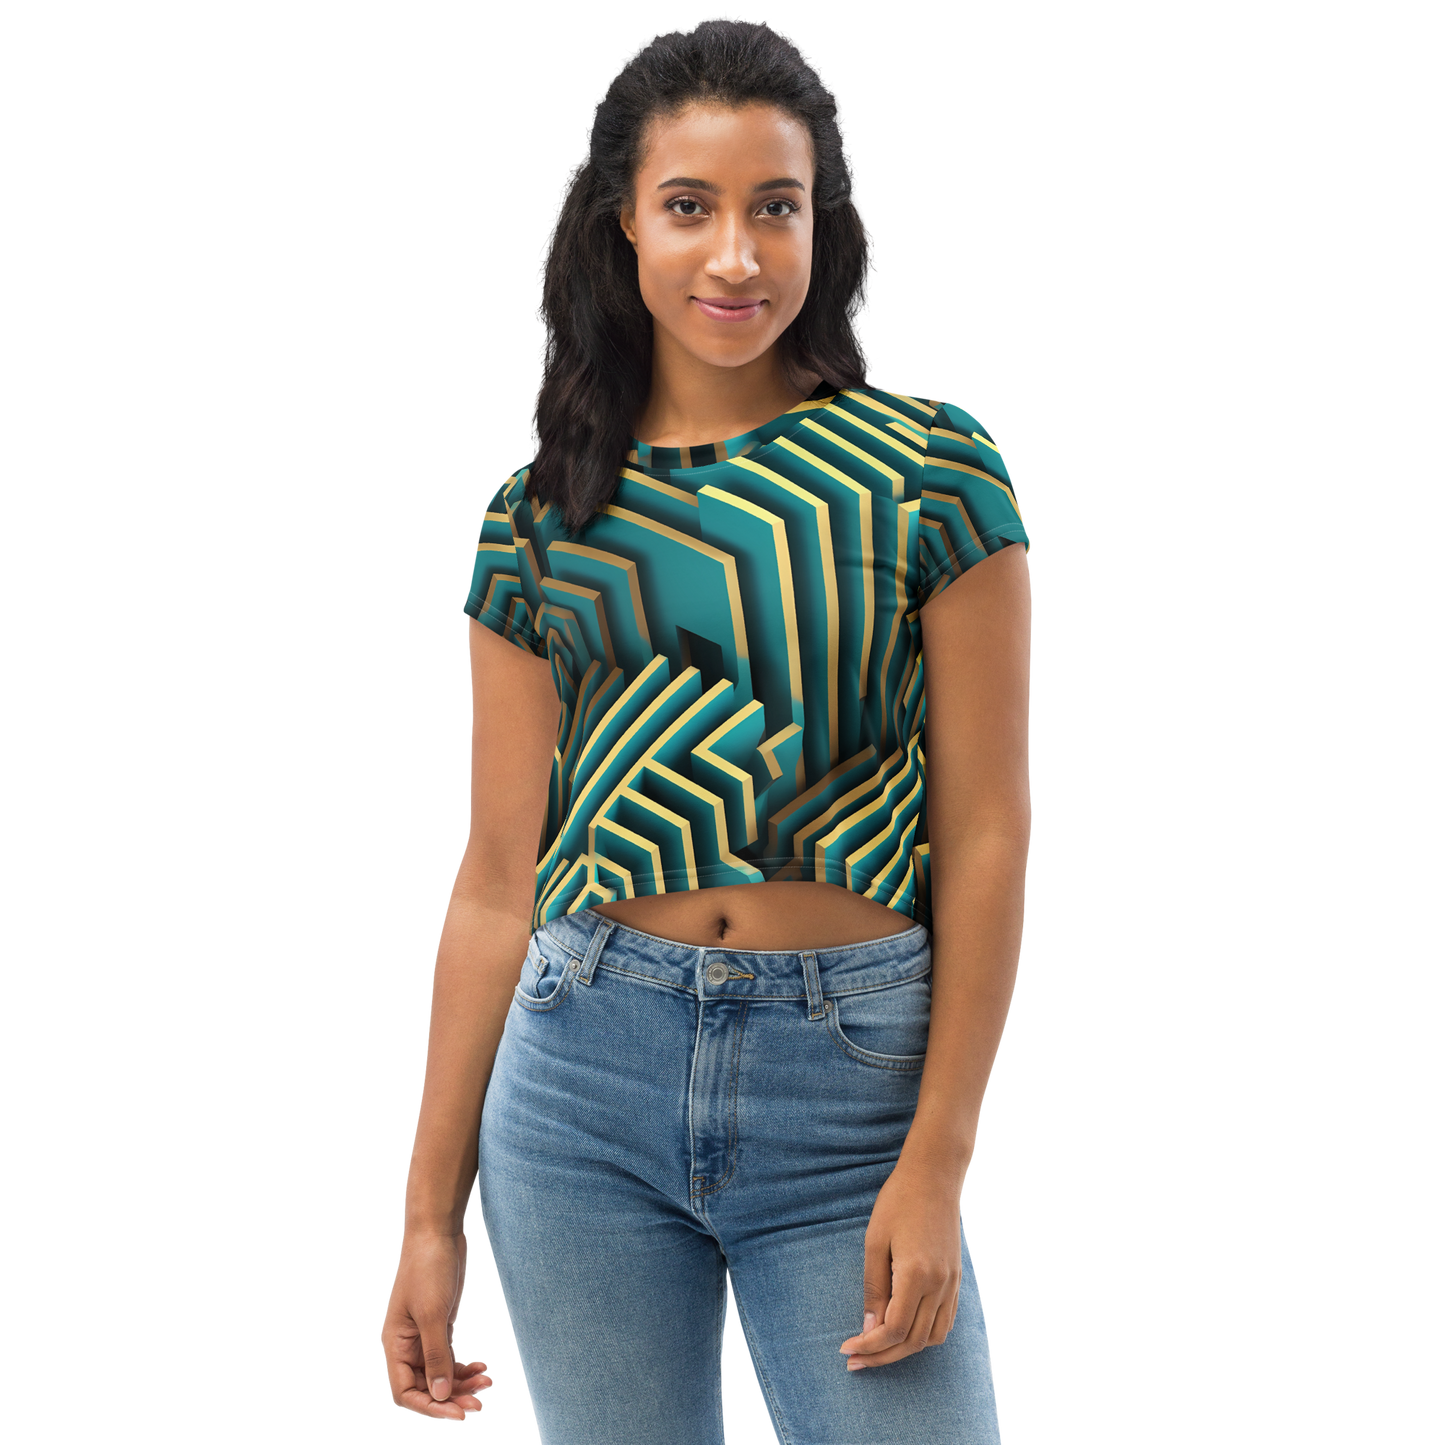 3D Maze Illusion | 3D Patterns | All-Over Print Crop Tee - #5